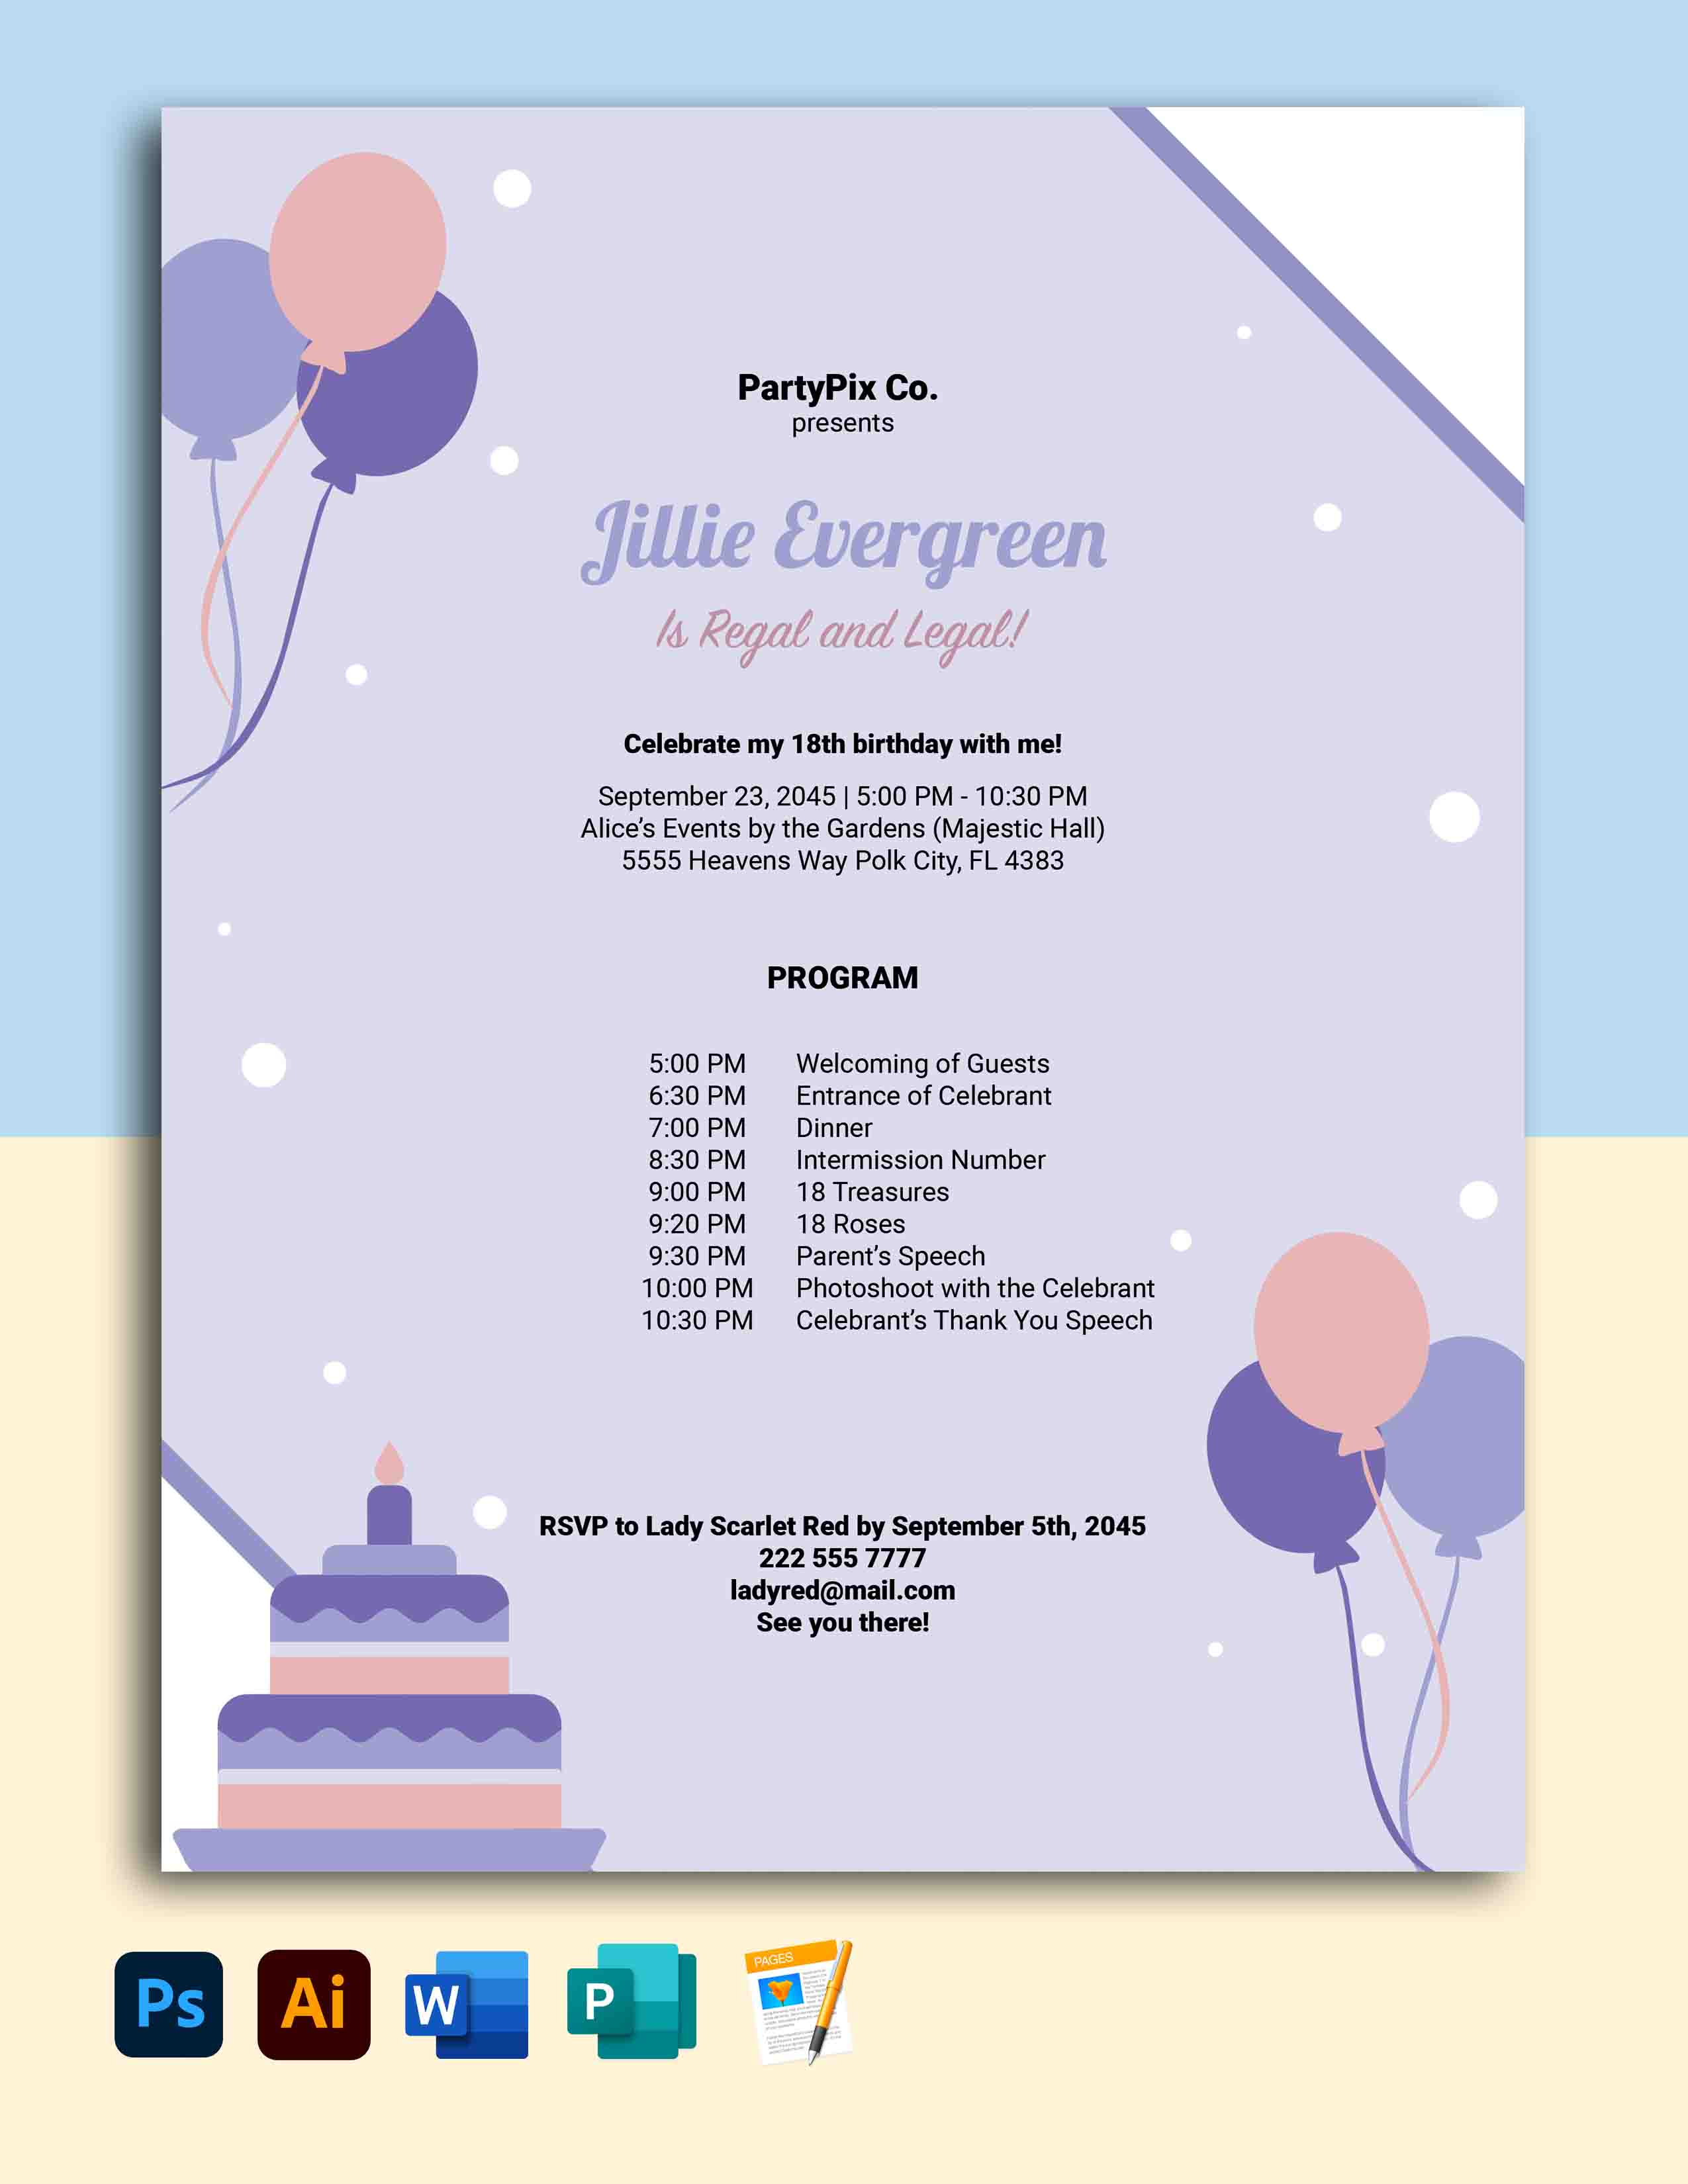 FREE Birthday Invitation Template - Download in Word, Google Docs, PDF,  Illustrator, Photoshop, Apple Pages, Publisher, InDesign, Outlook, EPS,  SVG, JPG, PNG, Wordpress